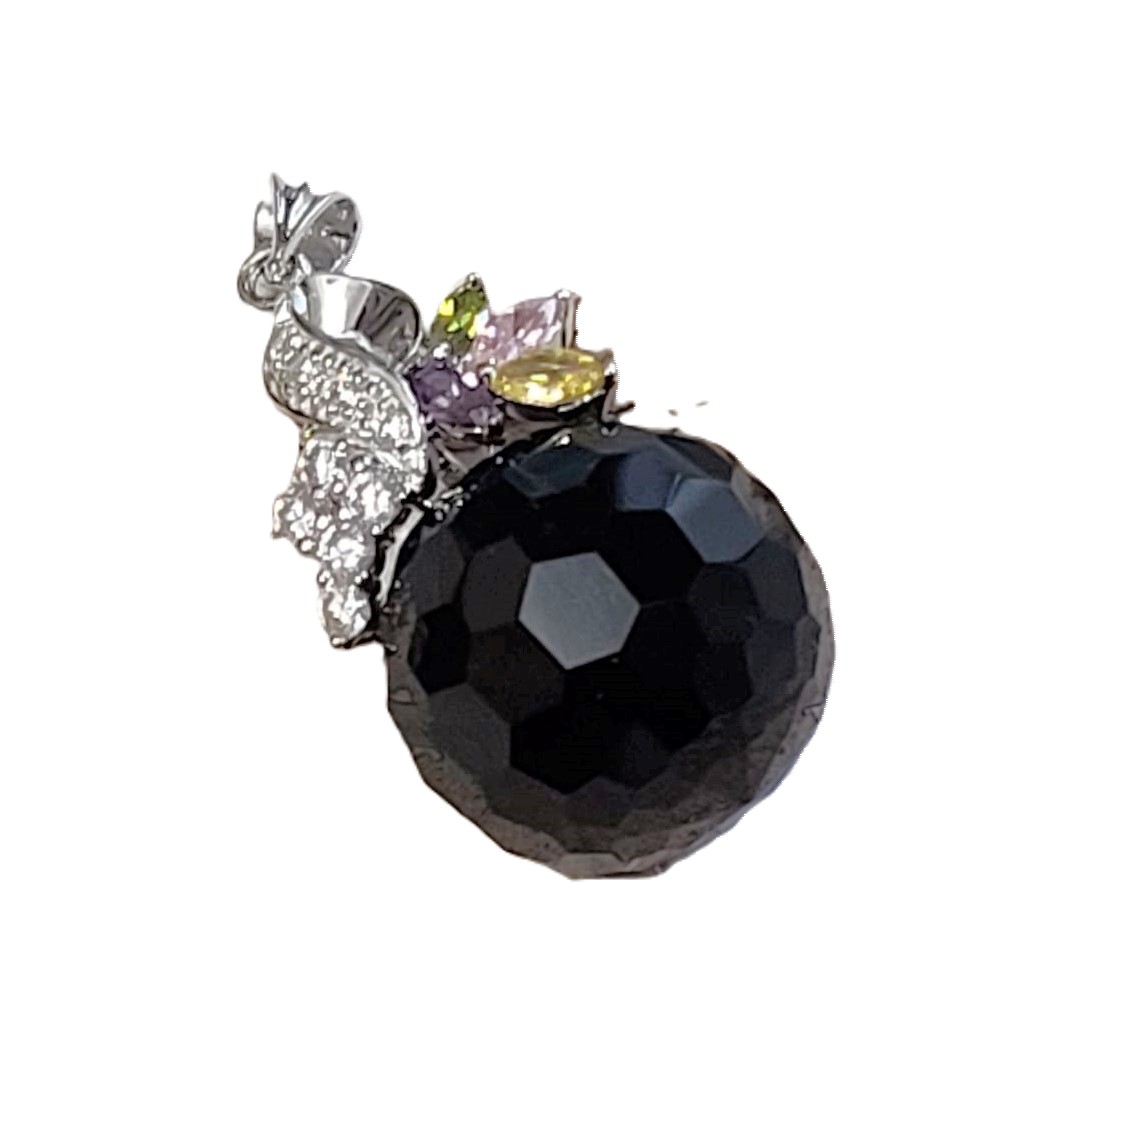 Faceted Black Onyx with CZ Stones Sterling Silver Pendant - Click Image to Close